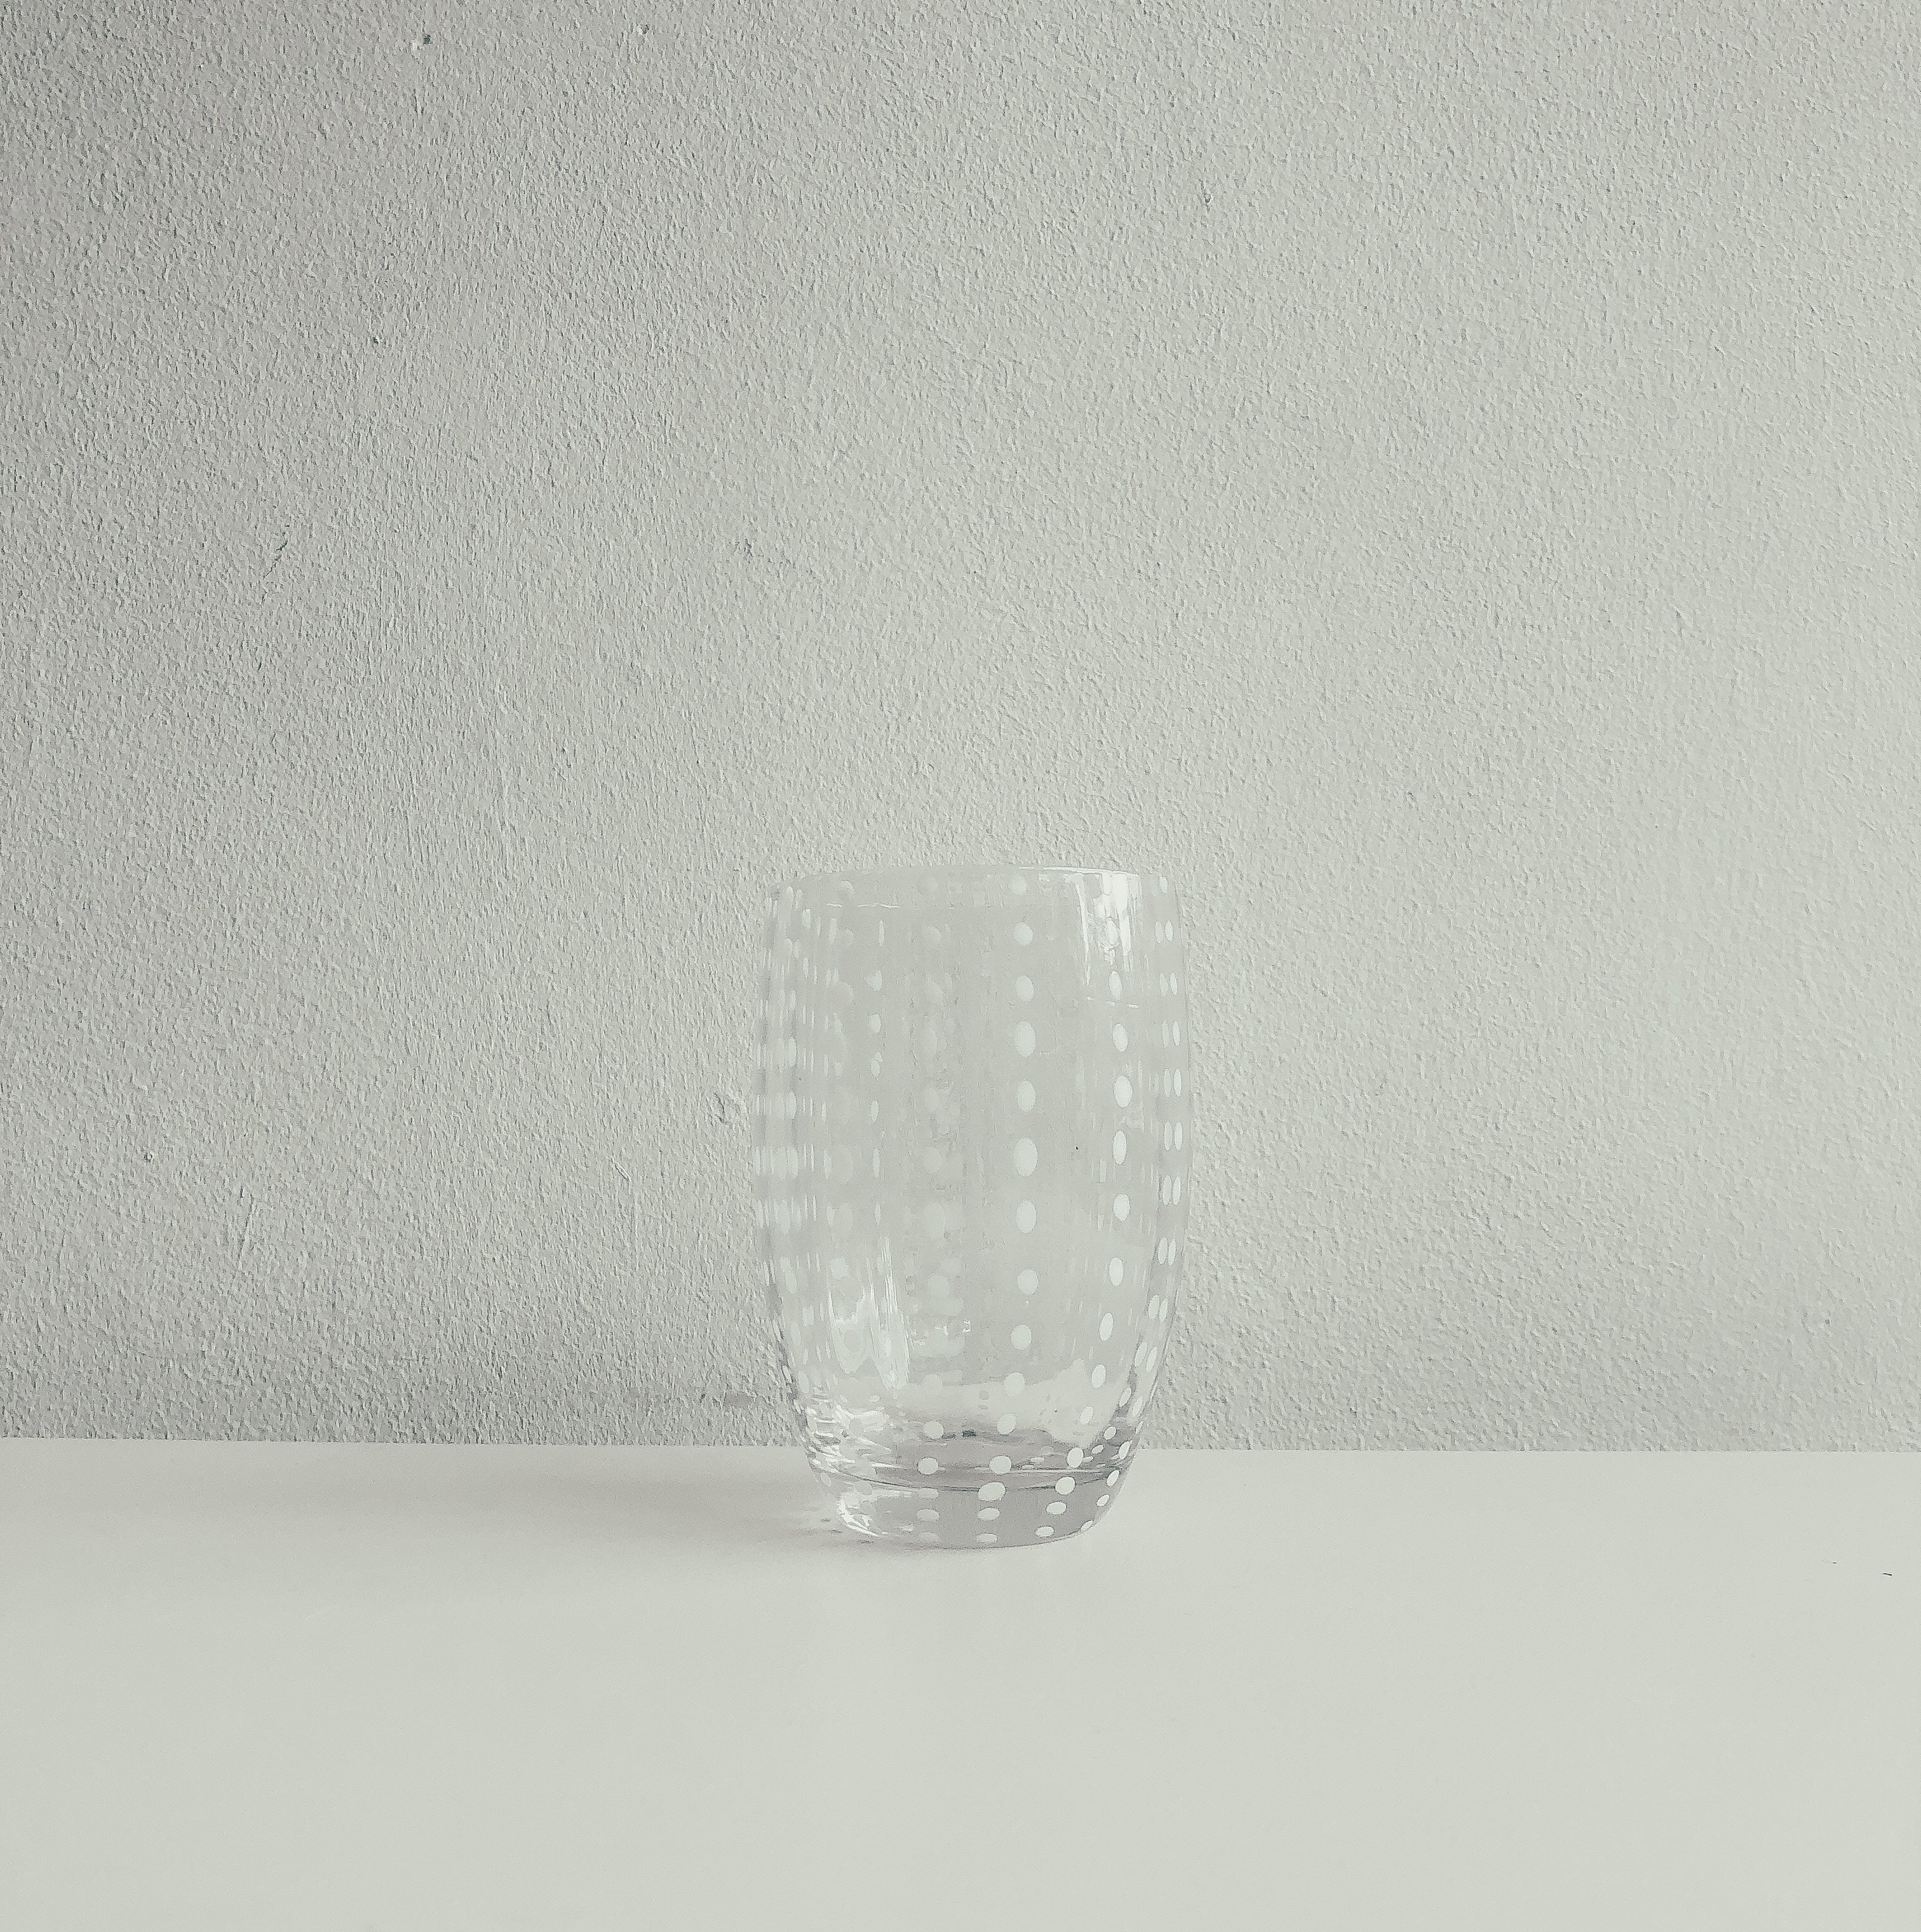 Handmade Watermelon Glasses in Clear by PROSE Tabletop